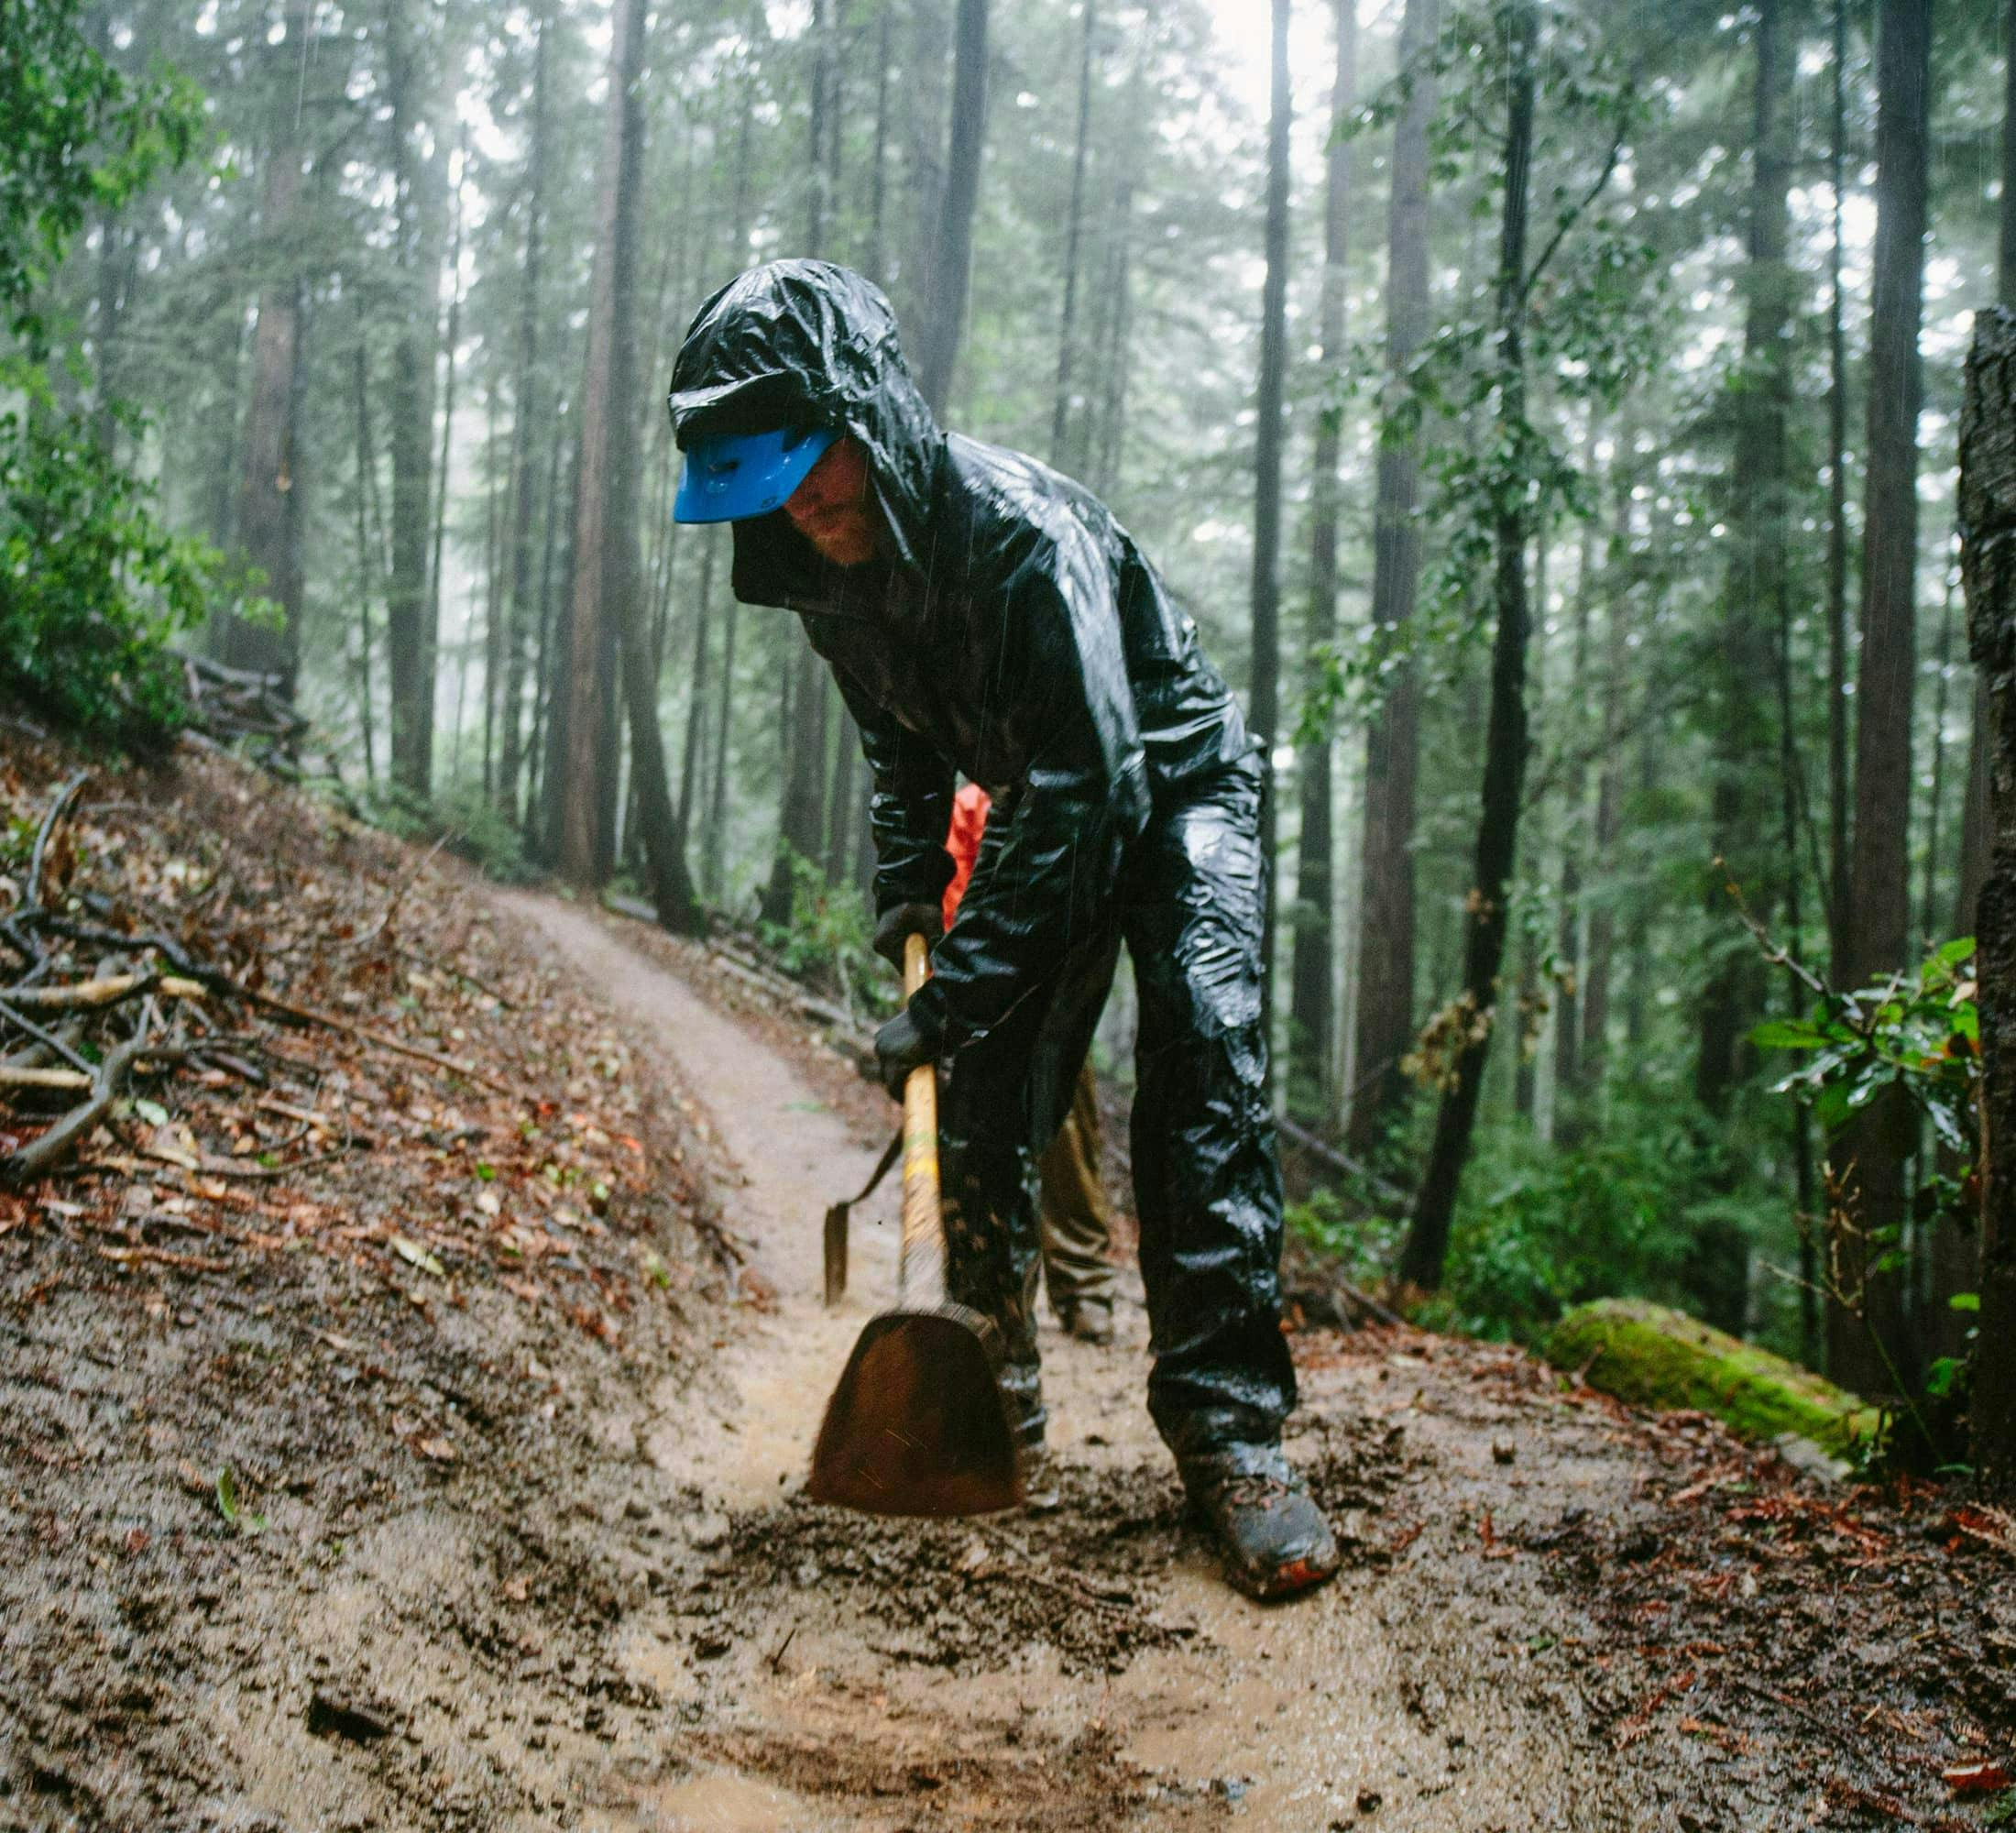 Trail maintenance with Land Trust of Santa Cruz County in California - Trail worker digging up a portion of the trail